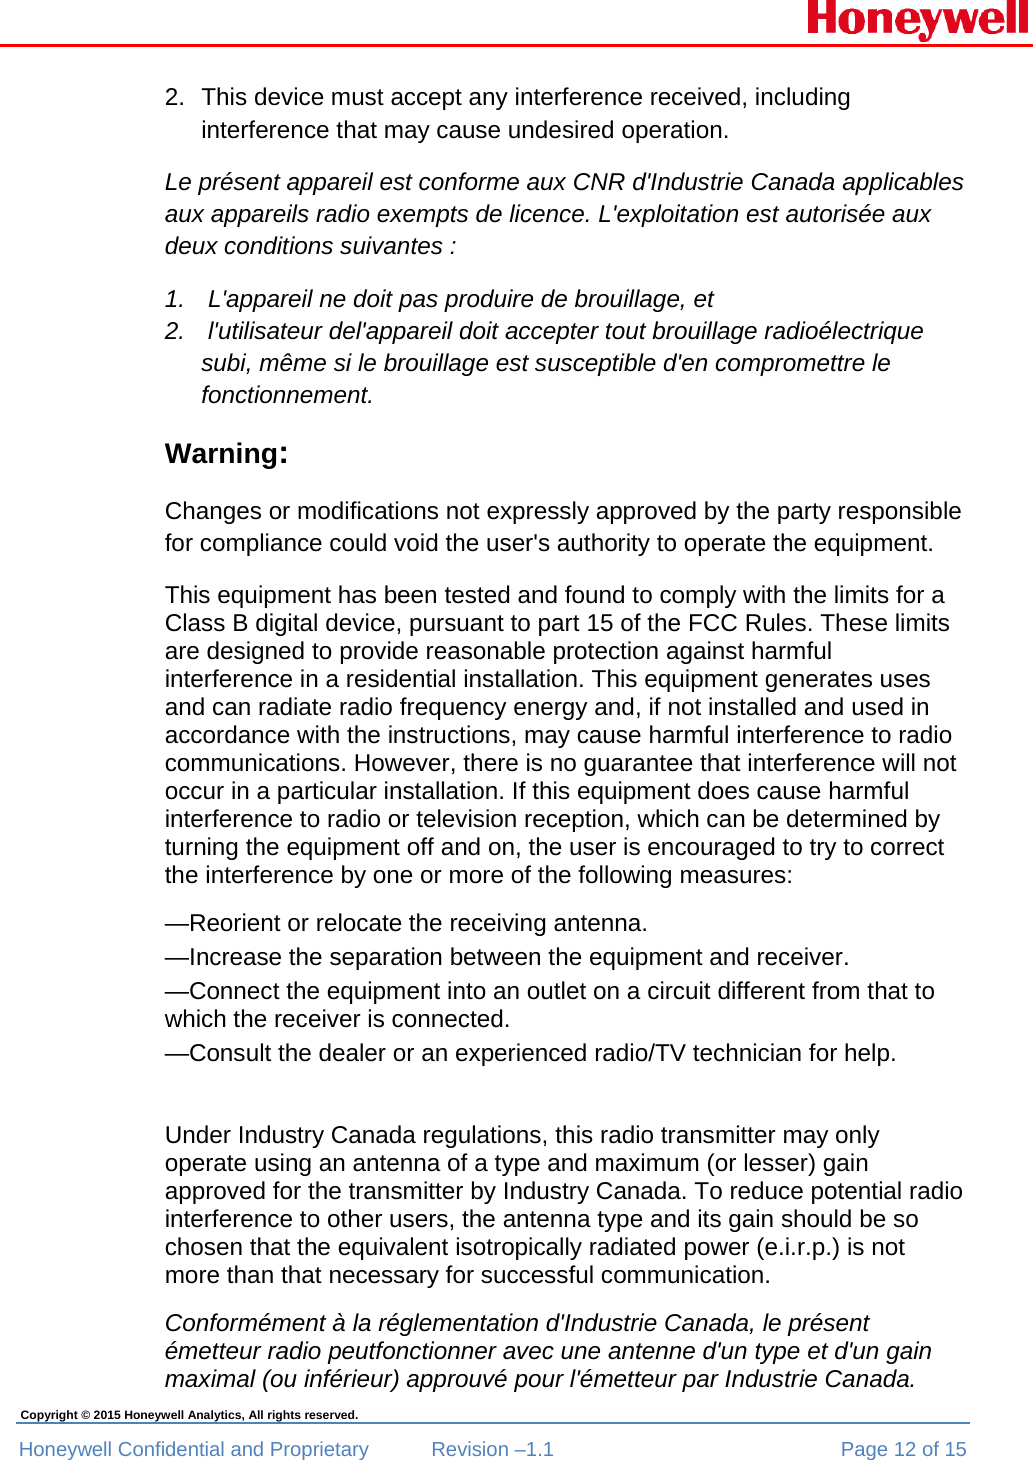  Honeywell Confidential and Proprietary  Revision –1.1  Page 12 of 15 Copyright © 2015 Honeywell Analytics, All rights reserved. 2.  This device must accept any interference received, including interference that may cause undesired operation. Le présent appareil est conforme aux CNR d&apos;Industrie Canada applicables aux appareils radio exempts de licence. L&apos;exploitation est autorisée aux deux conditions suivantes :  1.   L&apos;appareil ne doit pas produire de brouillage, et  2.   l&apos;utilisateur del&apos;appareil doit accepter tout brouillage radioélectrique subi, même si le brouillage est susceptible d&apos;en compromettre le fonctionnement. Warning: Changes or modifications not expressly approved by the party responsible for compliance could void the user&apos;s authority to operate the equipment. This equipment has been tested and found to comply with the limits for a Class B digital device, pursuant to part 15 of the FCC Rules. These limits are designed to provide reasonable protection against harmful interference in a residential installation. This equipment generates uses and can radiate radio frequency energy and, if not installed and used in accordance with the instructions, may cause harmful interference to radio communications. However, there is no guarantee that interference will not occur in a particular installation. If this equipment does cause harmful interference to radio or television reception, which can be determined by turning the equipment off and on, the user is encouraged to try to correct the interference by one or more of the following measures: —Reorient or relocate the receiving antenna. —Increase the separation between the equipment and receiver. —Connect the equipment into an outlet on a circuit different from that to which the receiver is connected. —Consult the dealer or an experienced radio/TV technician for help.  Under Industry Canada regulations, this radio transmitter may only operate using an antenna of a type and maximum (or lesser) gain approved for the transmitter by Industry Canada. To reduce potential radio interference to other users, the antenna type and its gain should be so chosen that the equivalent isotropically radiated power (e.i.r.p.) is not more than that necessary for successful communication.  Conformément à la réglementation d&apos;Industrie Canada, le présent émetteur radio peutfonctionner avec une antenne d&apos;un type et d&apos;un gain maximal (ou inférieur) approuvé pour l&apos;émetteur par Industrie Canada. 